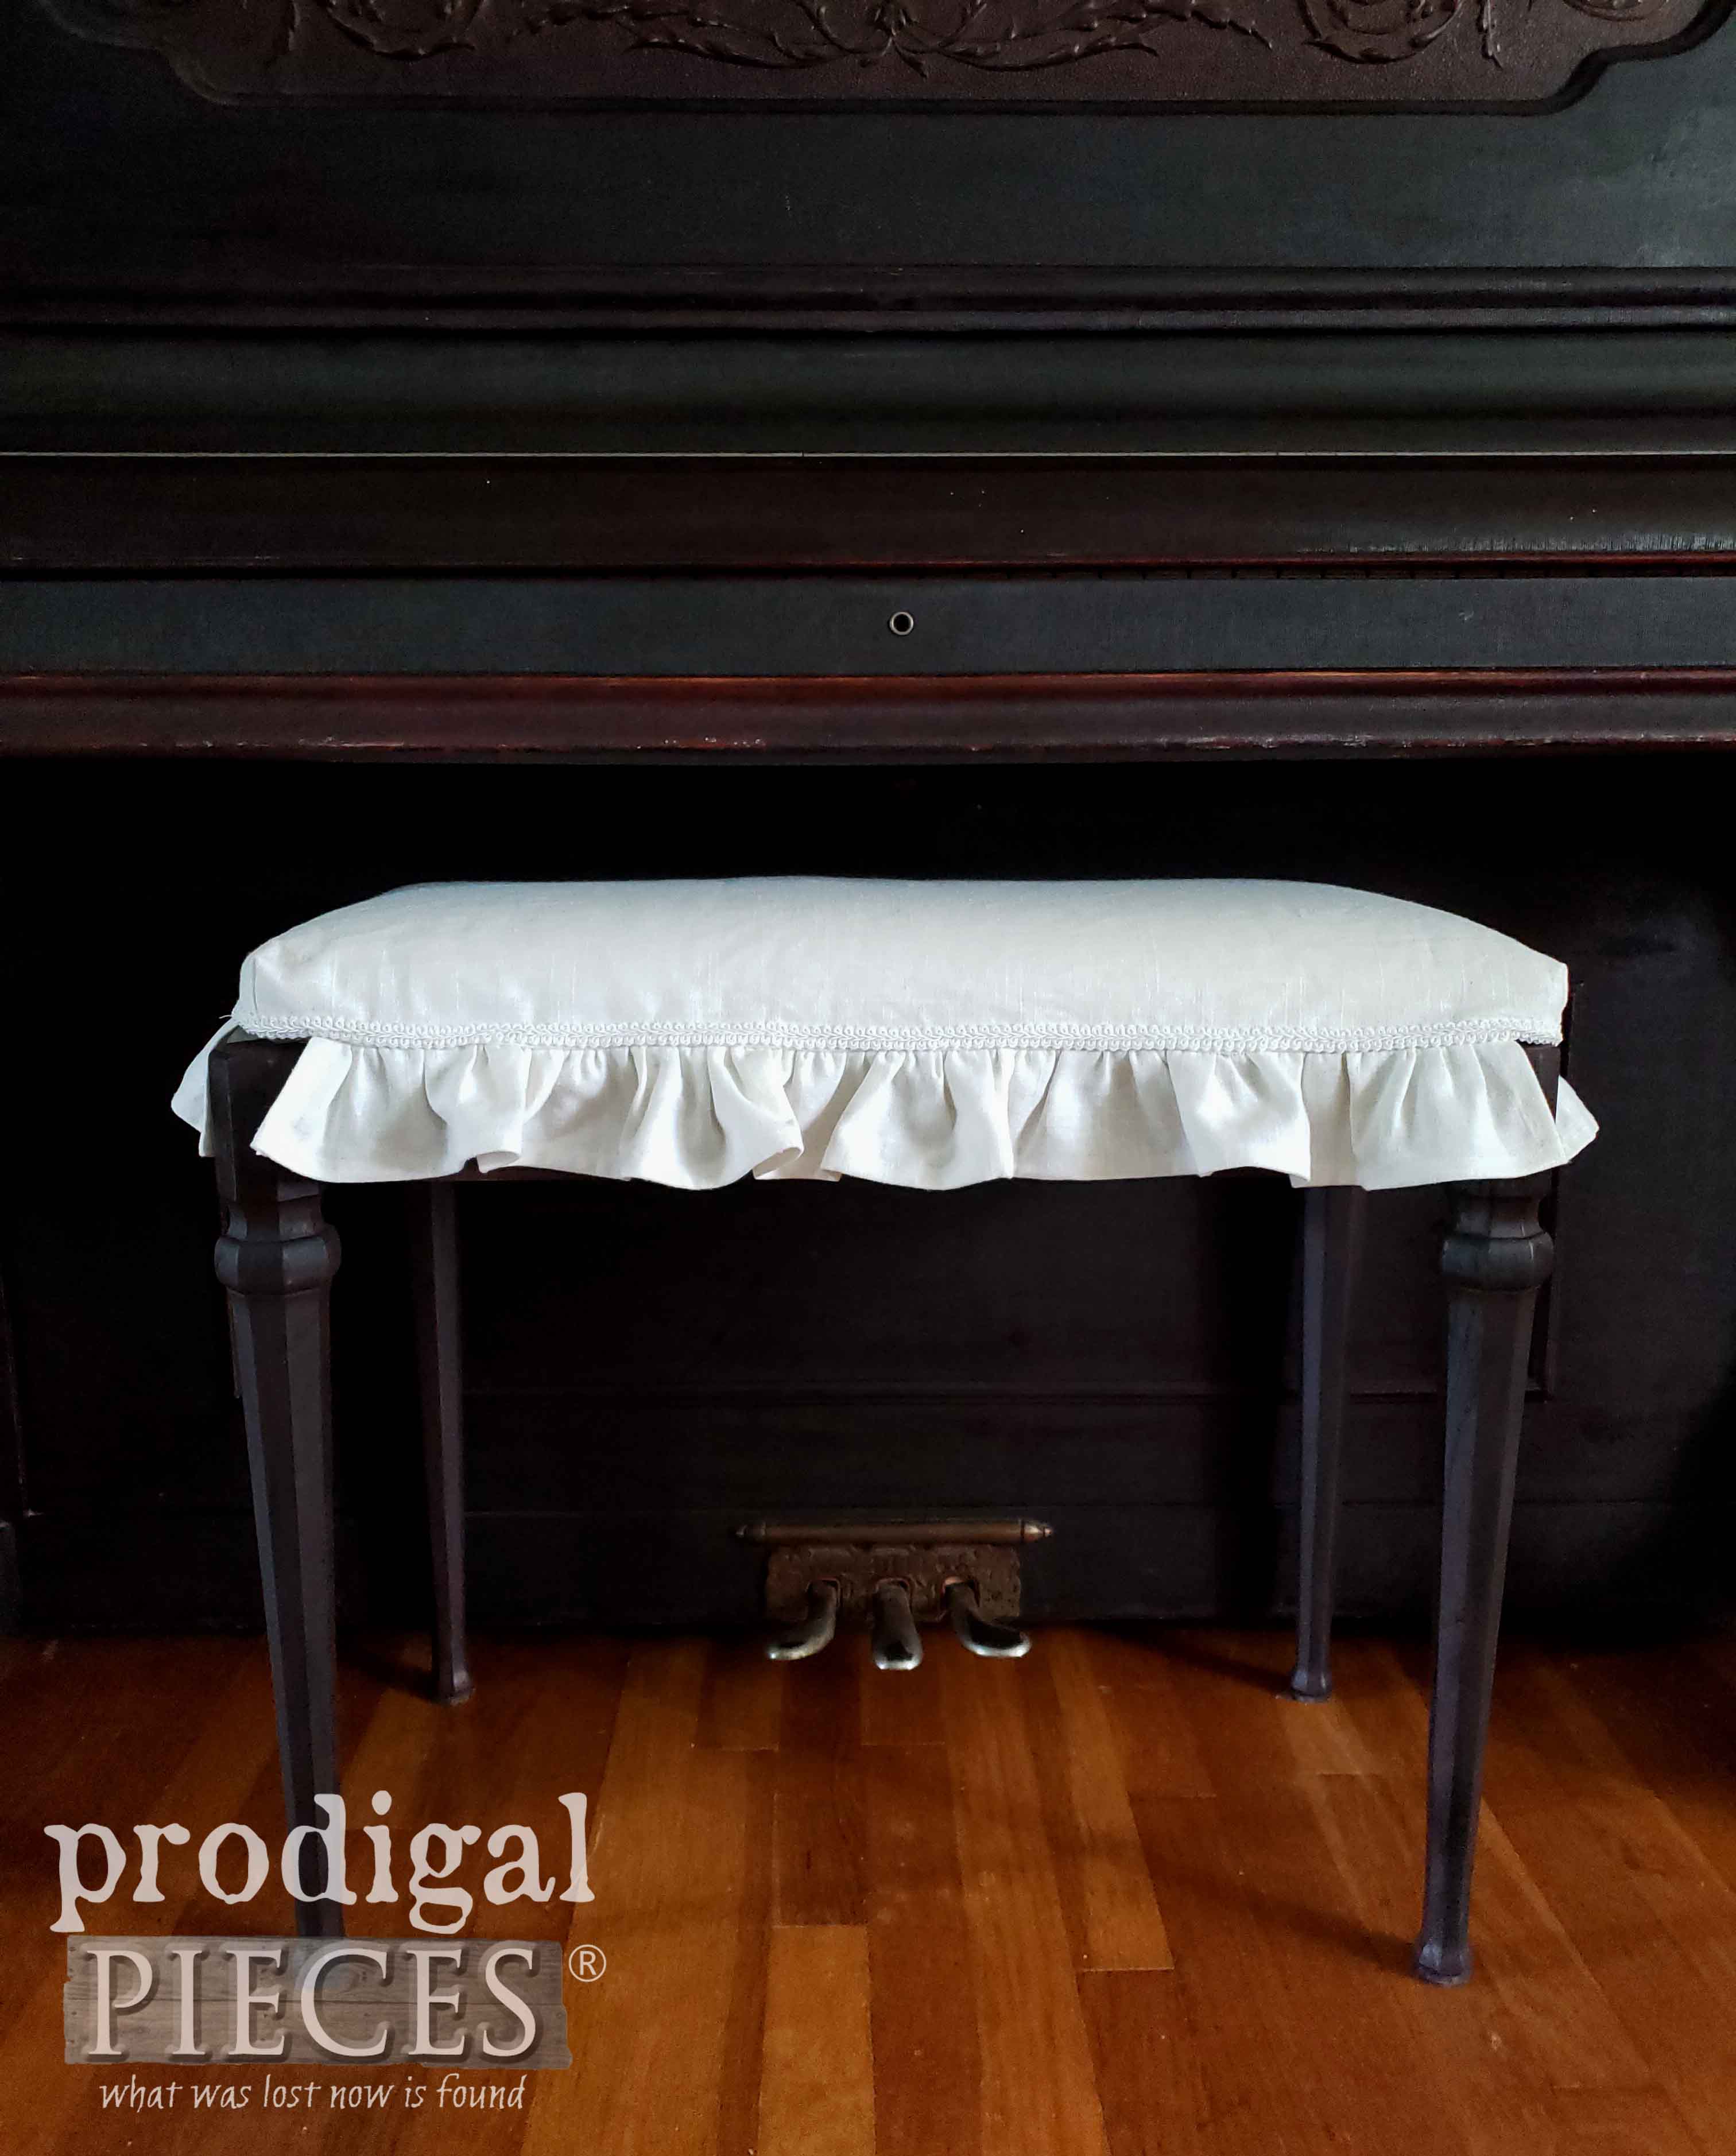 DIY Vintage Piano Bench Makeover with Linen Slipcover by Larissa of Prodigal Pieces | prodigalpieces.com